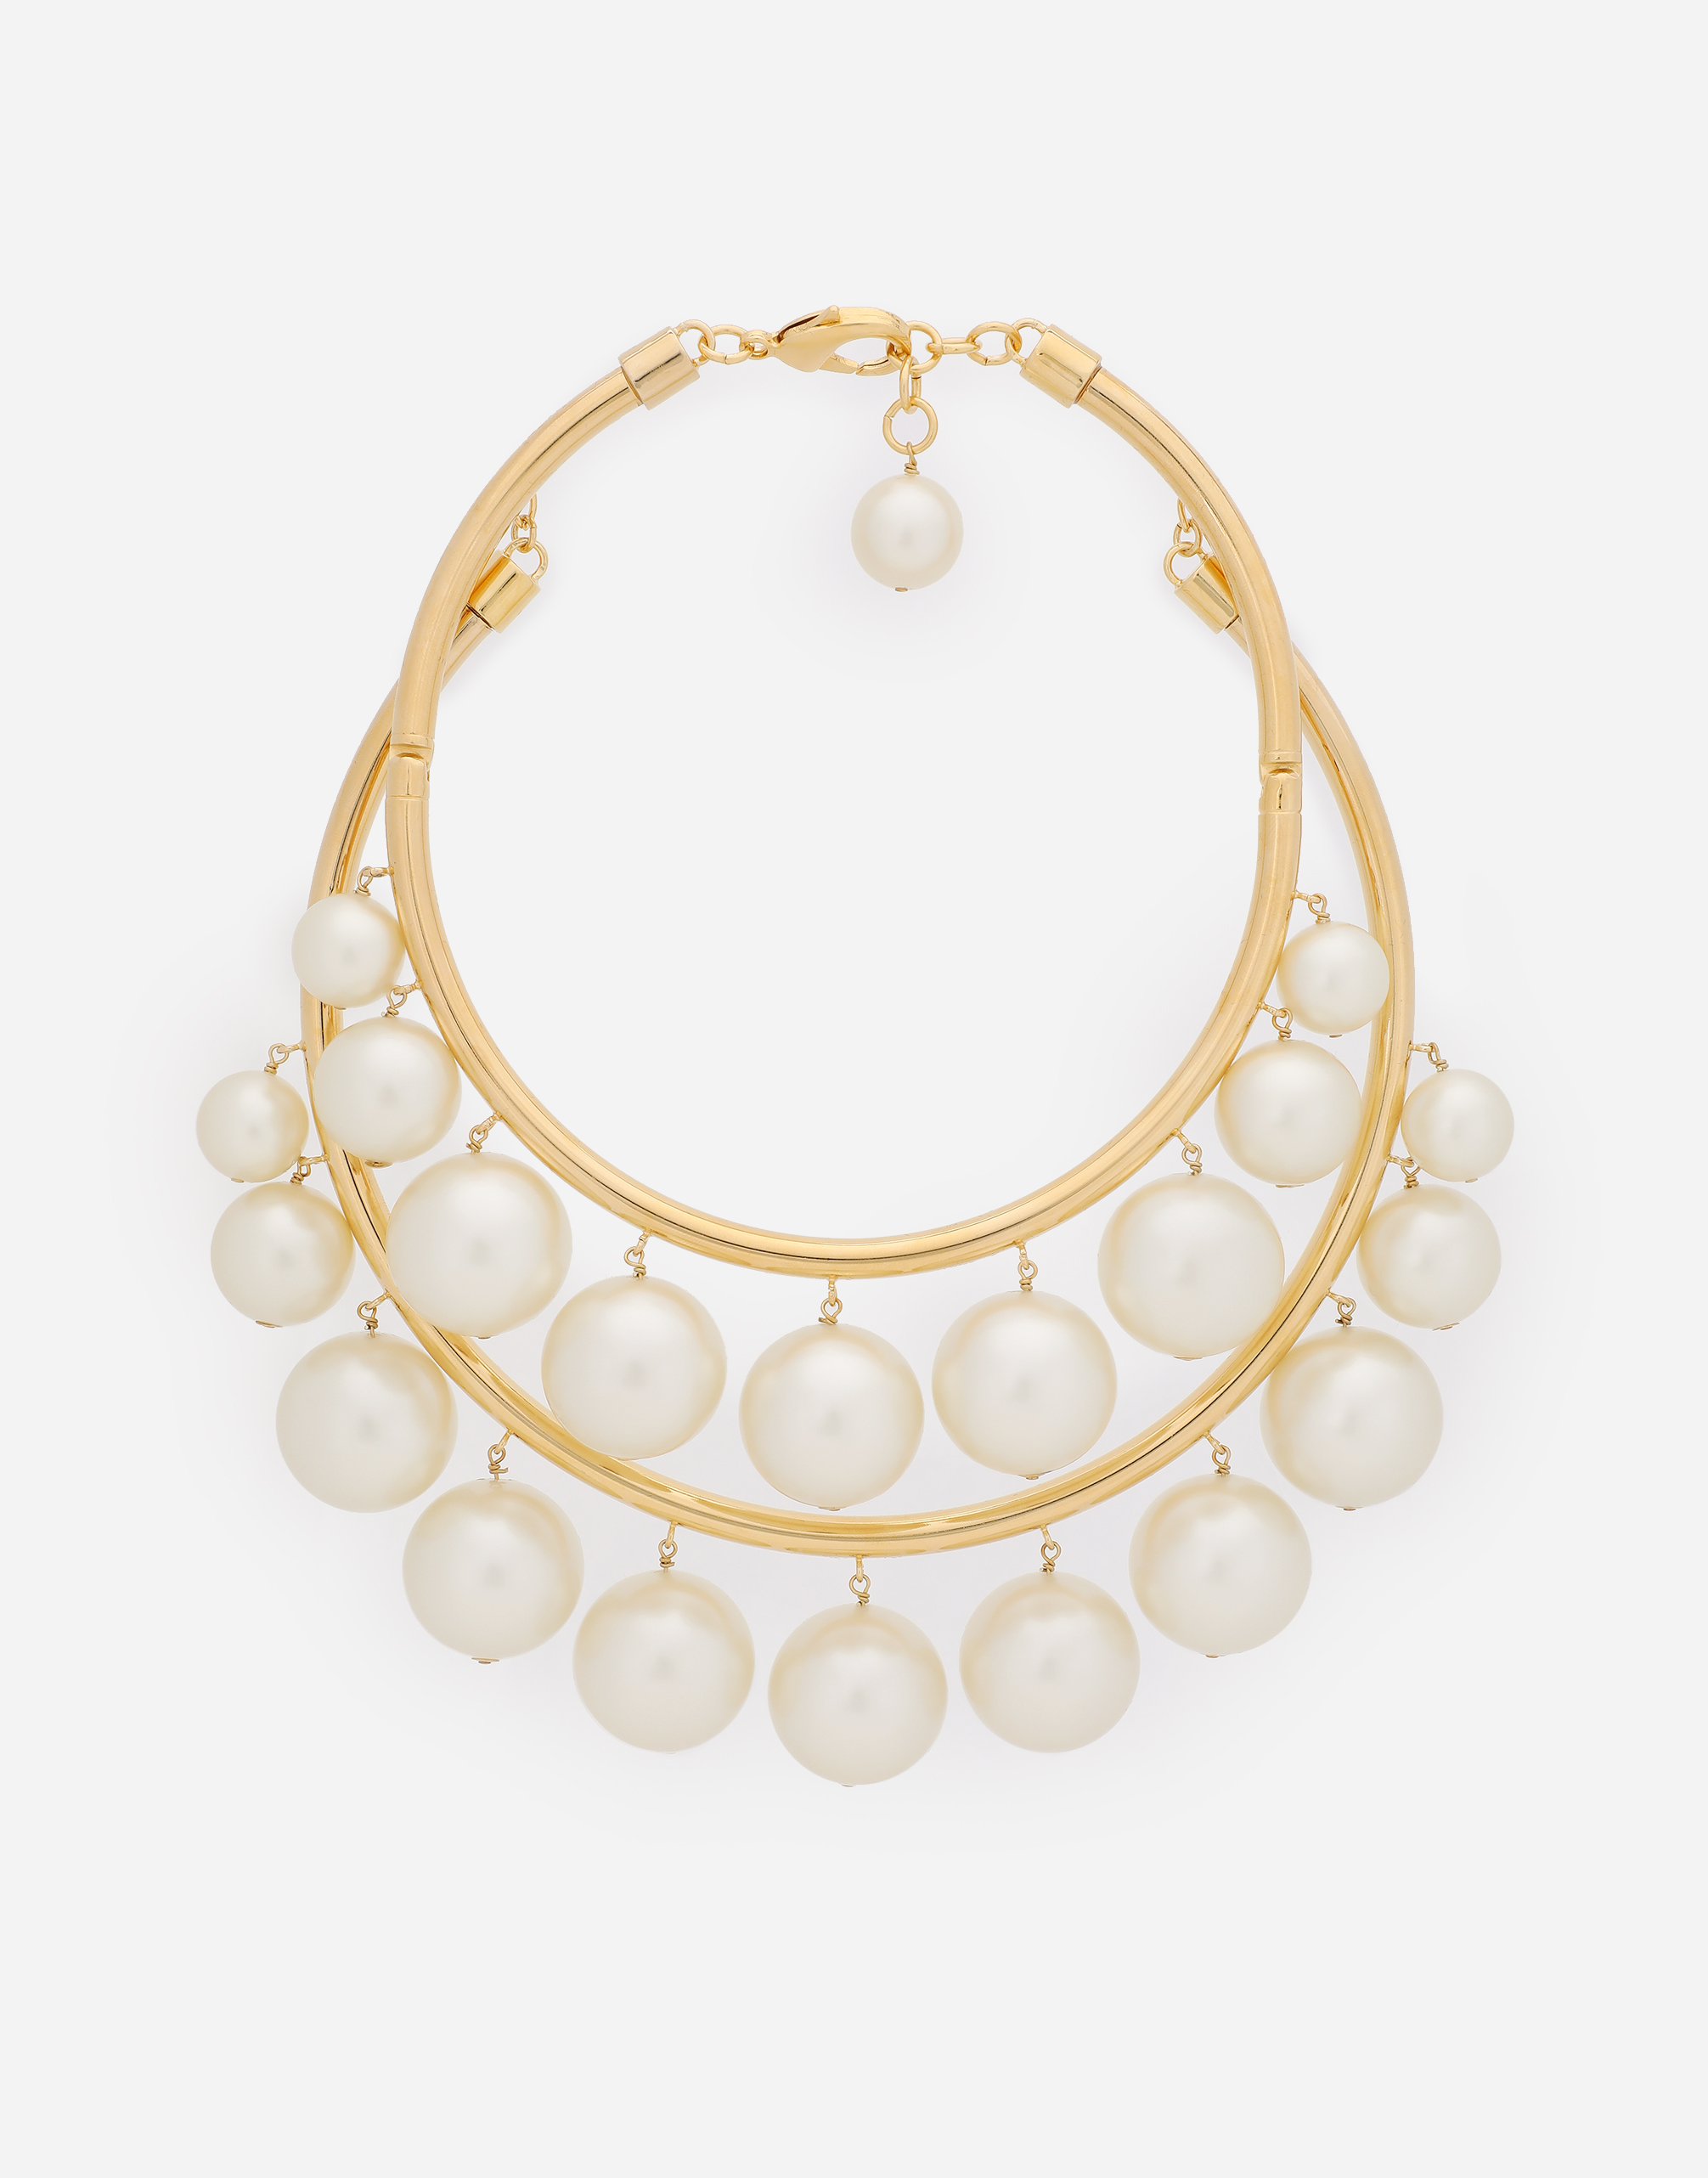 Choker with maxi-balls in Gold